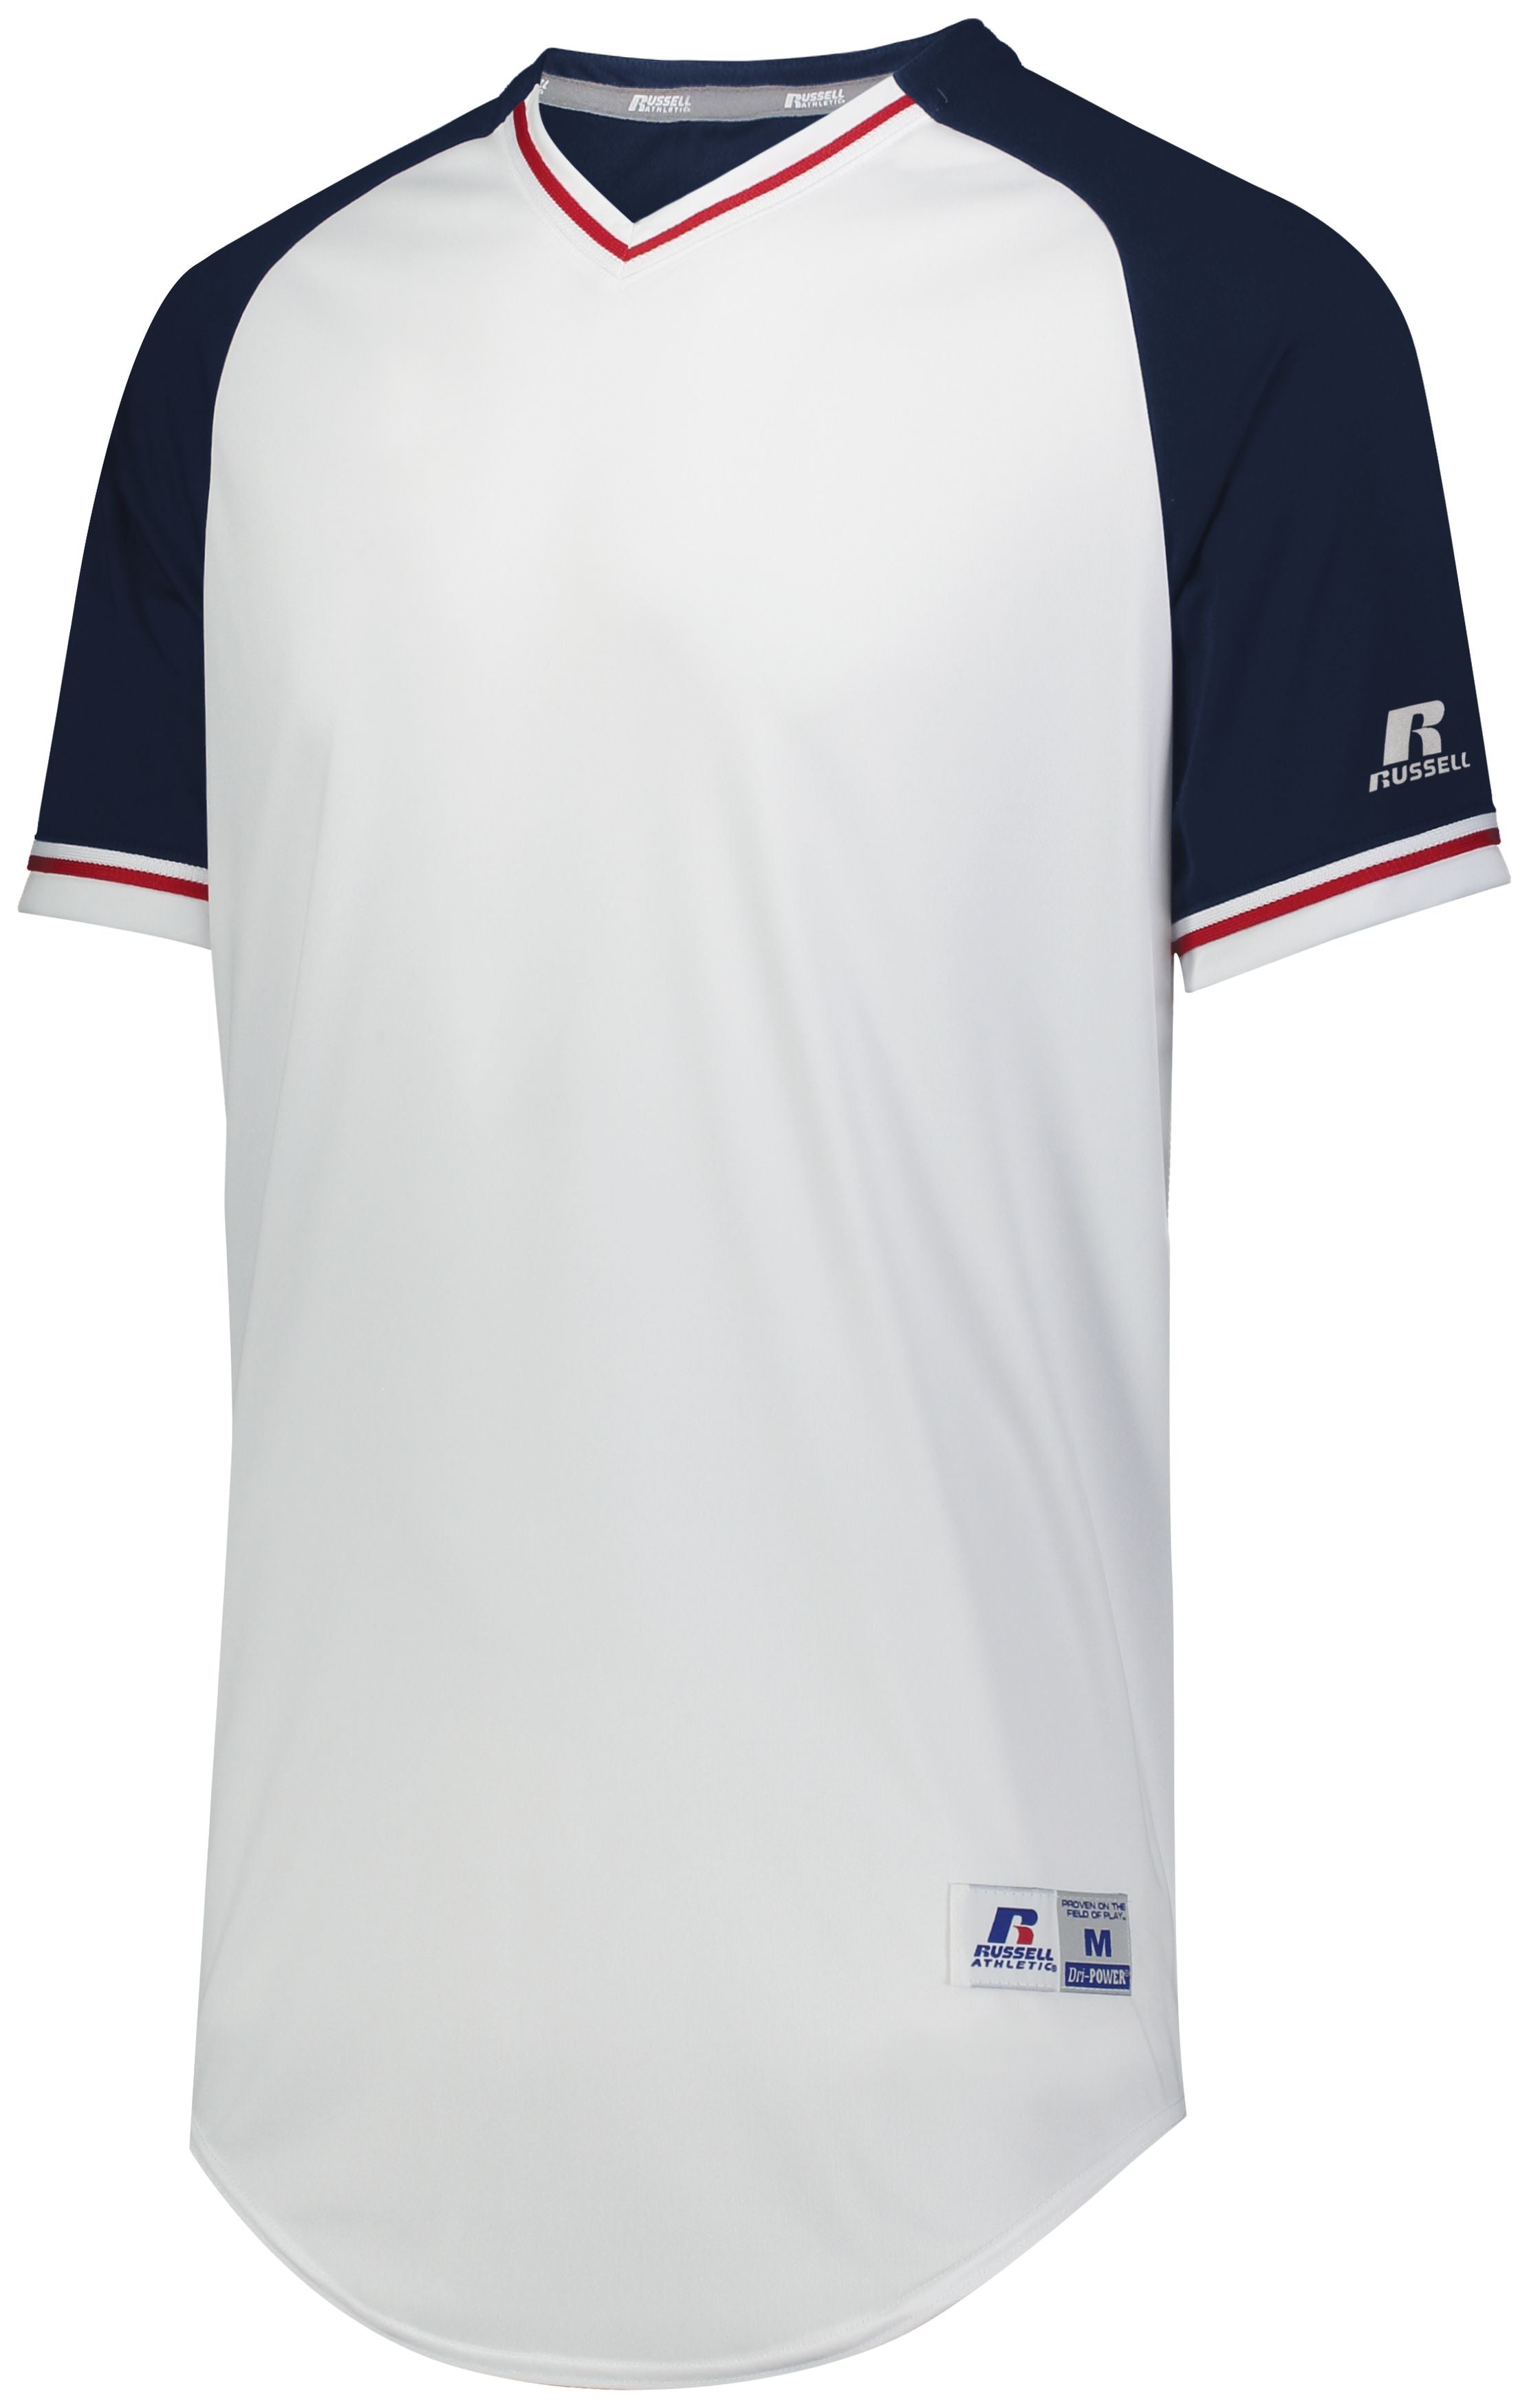 Russell Athletic Youth Classic V-Neck Jersey in White/Navy/True Red  -Part of the Youth, Youth-Jersey, Baseball, Russell-Athletic-Products, Shirts, All-Sports, All-Sports-1 product lines at KanaleyCreations.com